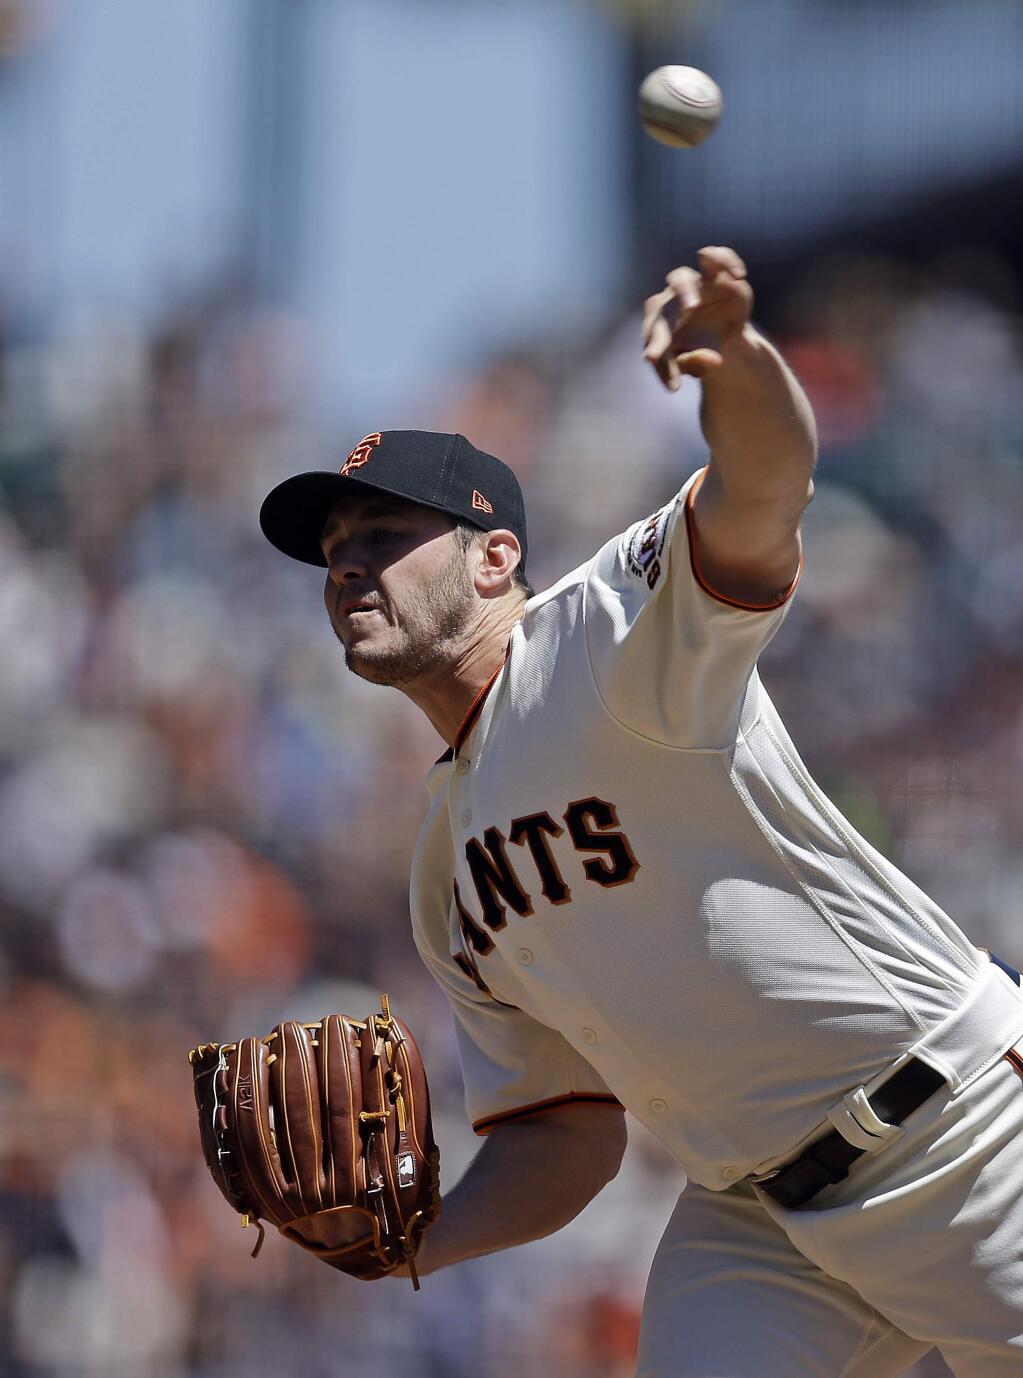 San Francisco Giants pitcher Ty Blach works against the San Diego Padres in the first inning of a baseball game Sunday, April 30, 2017, in San Francisco. (AP Photo/Ben Margot)